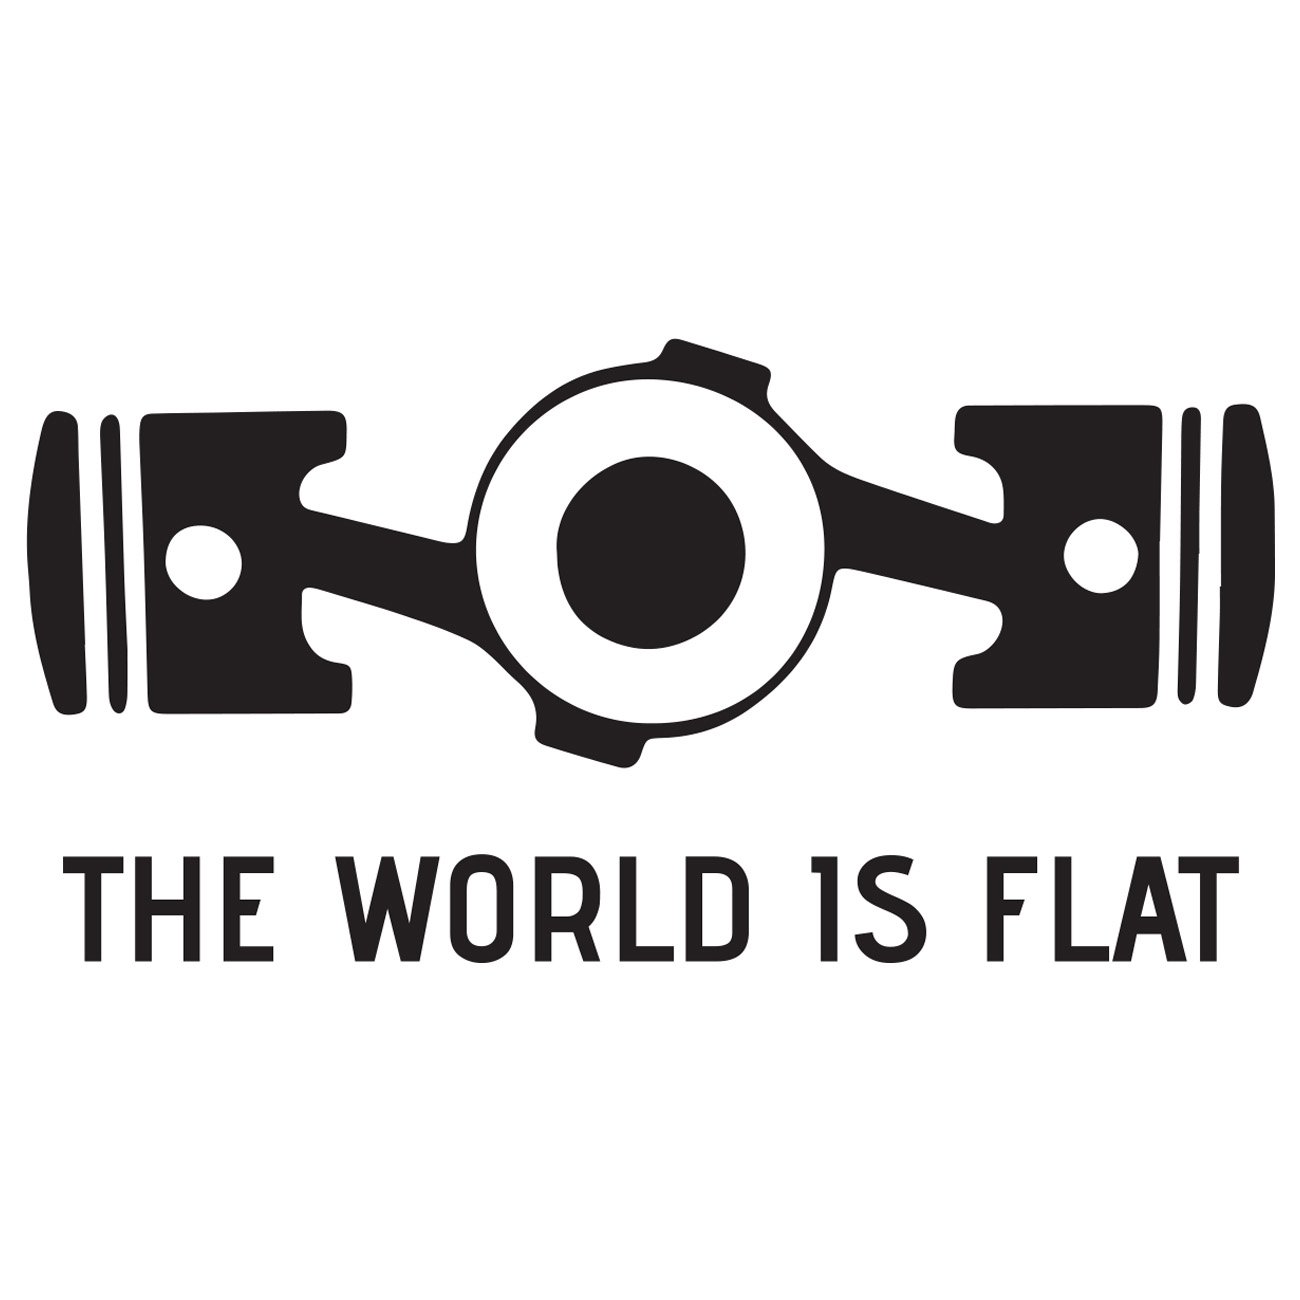 The world is flat